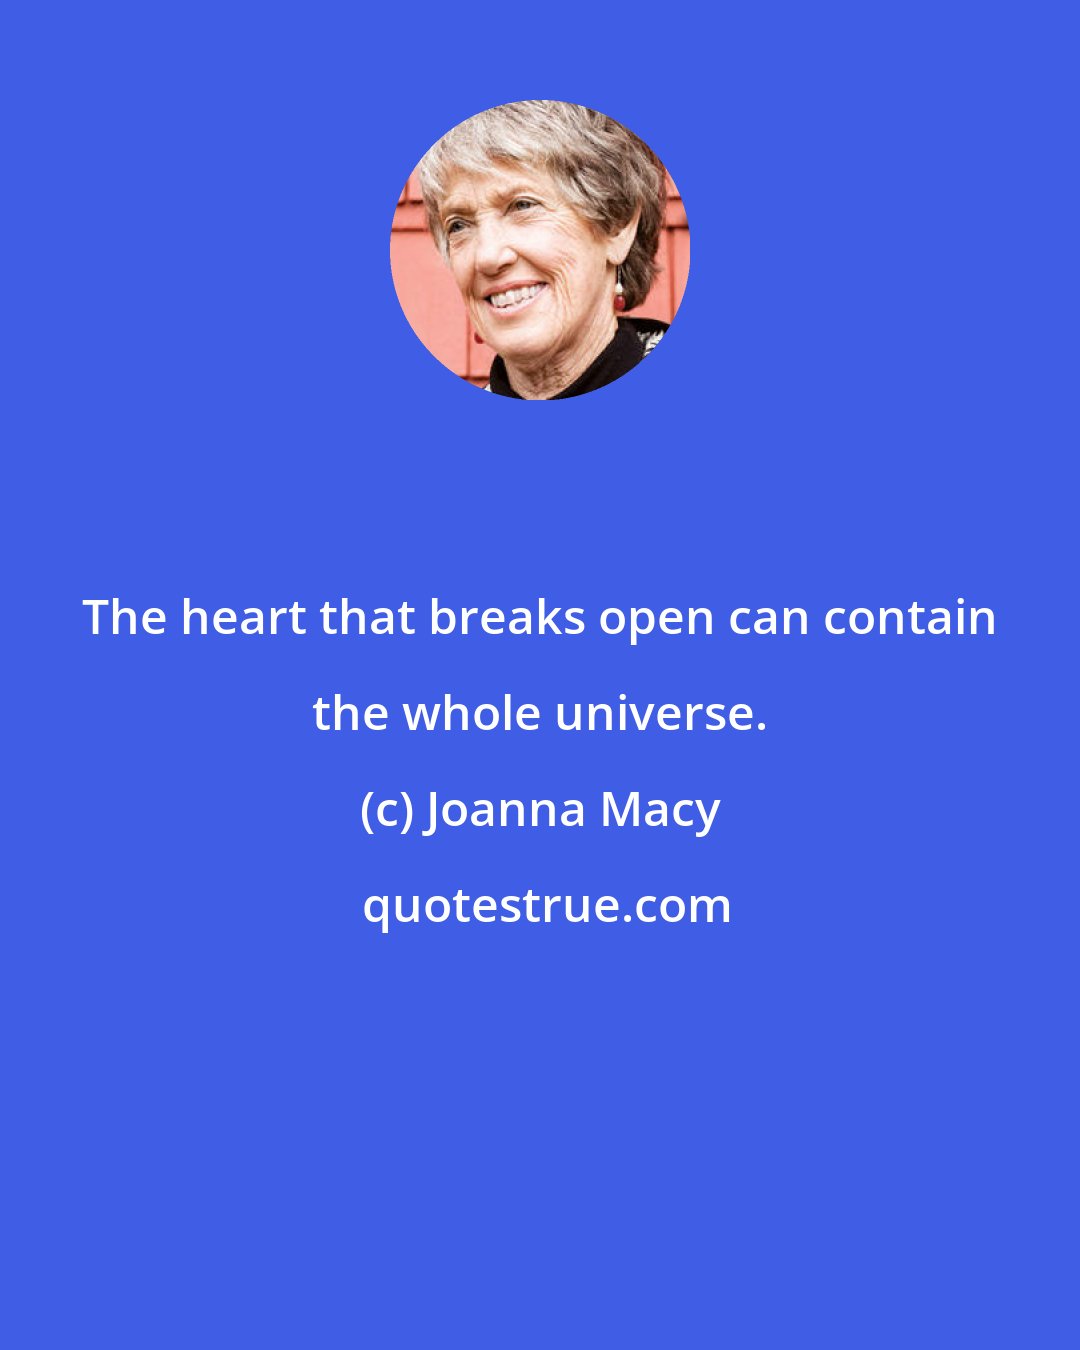 Joanna Macy: The heart that breaks open can contain the whole universe.